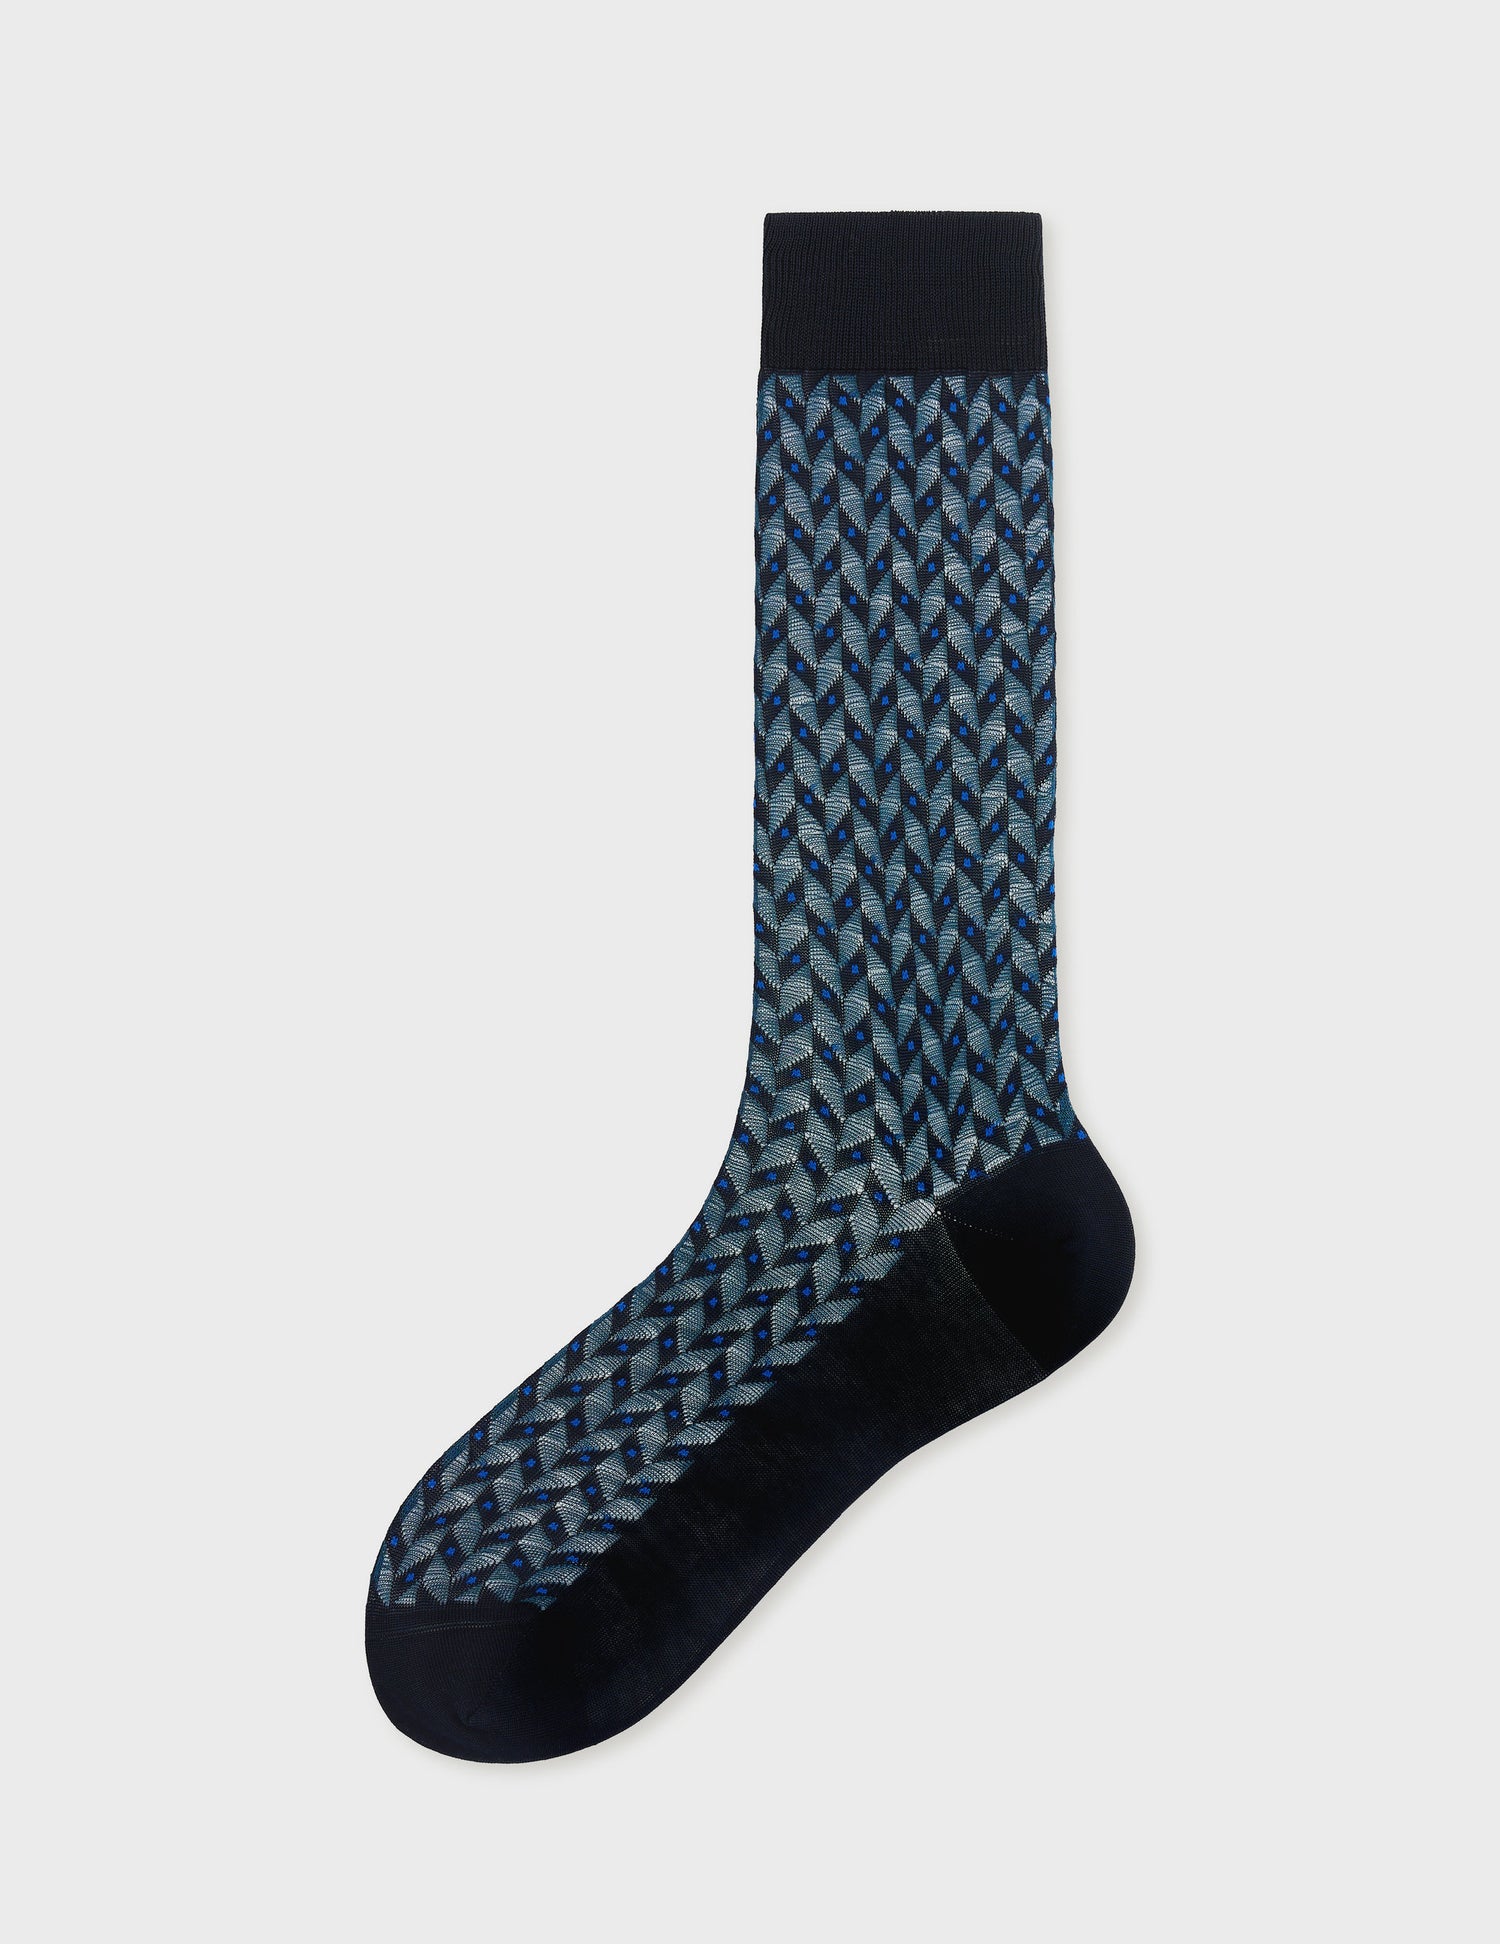 Blue and navy patterned socks in double thread from Scotland